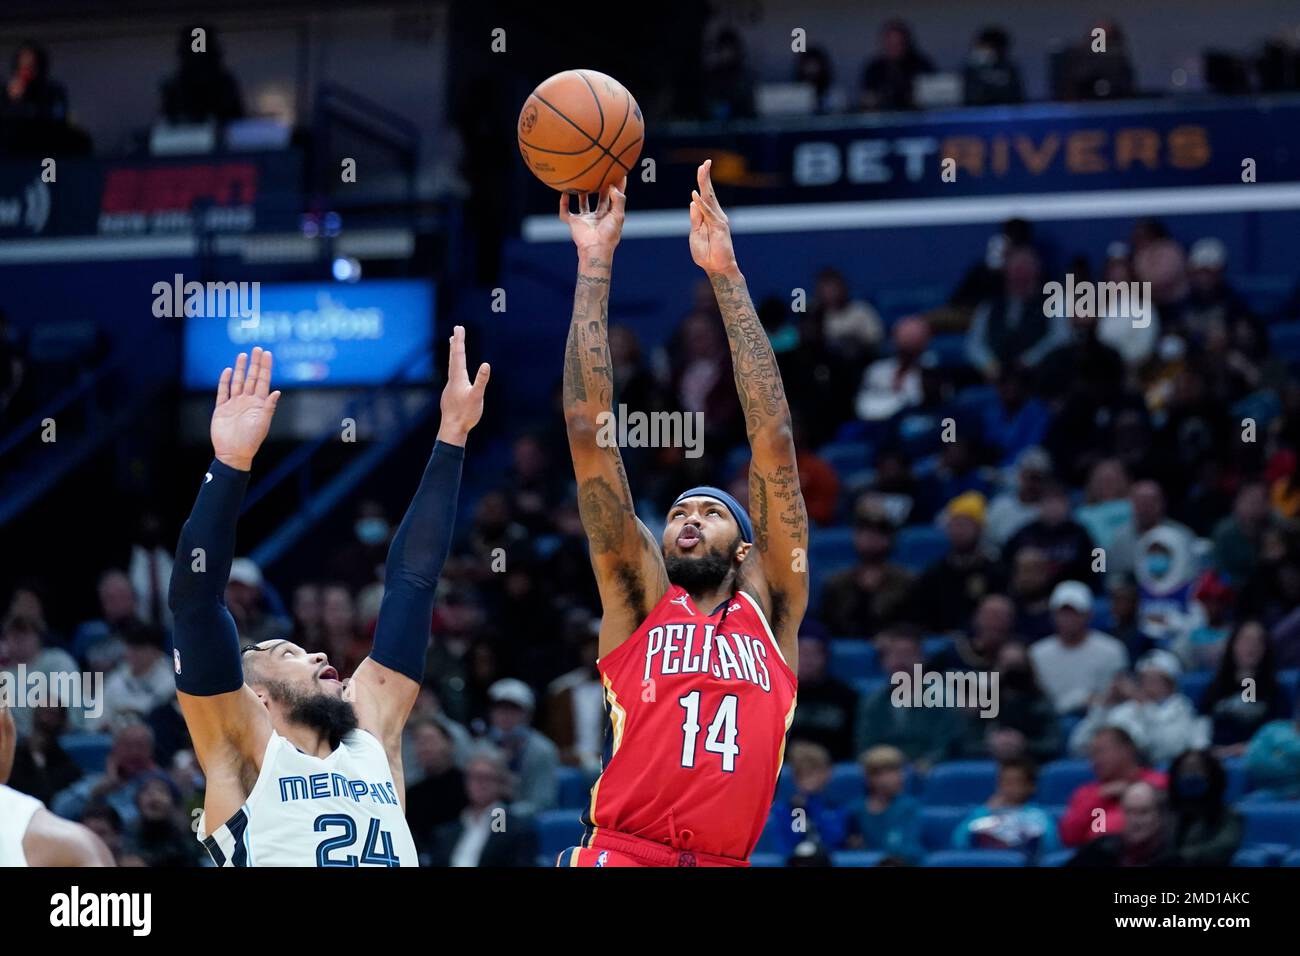 New Orleans Pelicans forward Brandon Ingram (14) shoots over Memphis Grizzlies forward Dillon Brooks (24) in the first half of an NBA basketball game in New Orleans, Saturday, Nov. 13, 2021. (AP Photo/Gerald Herbert) Stock Photo